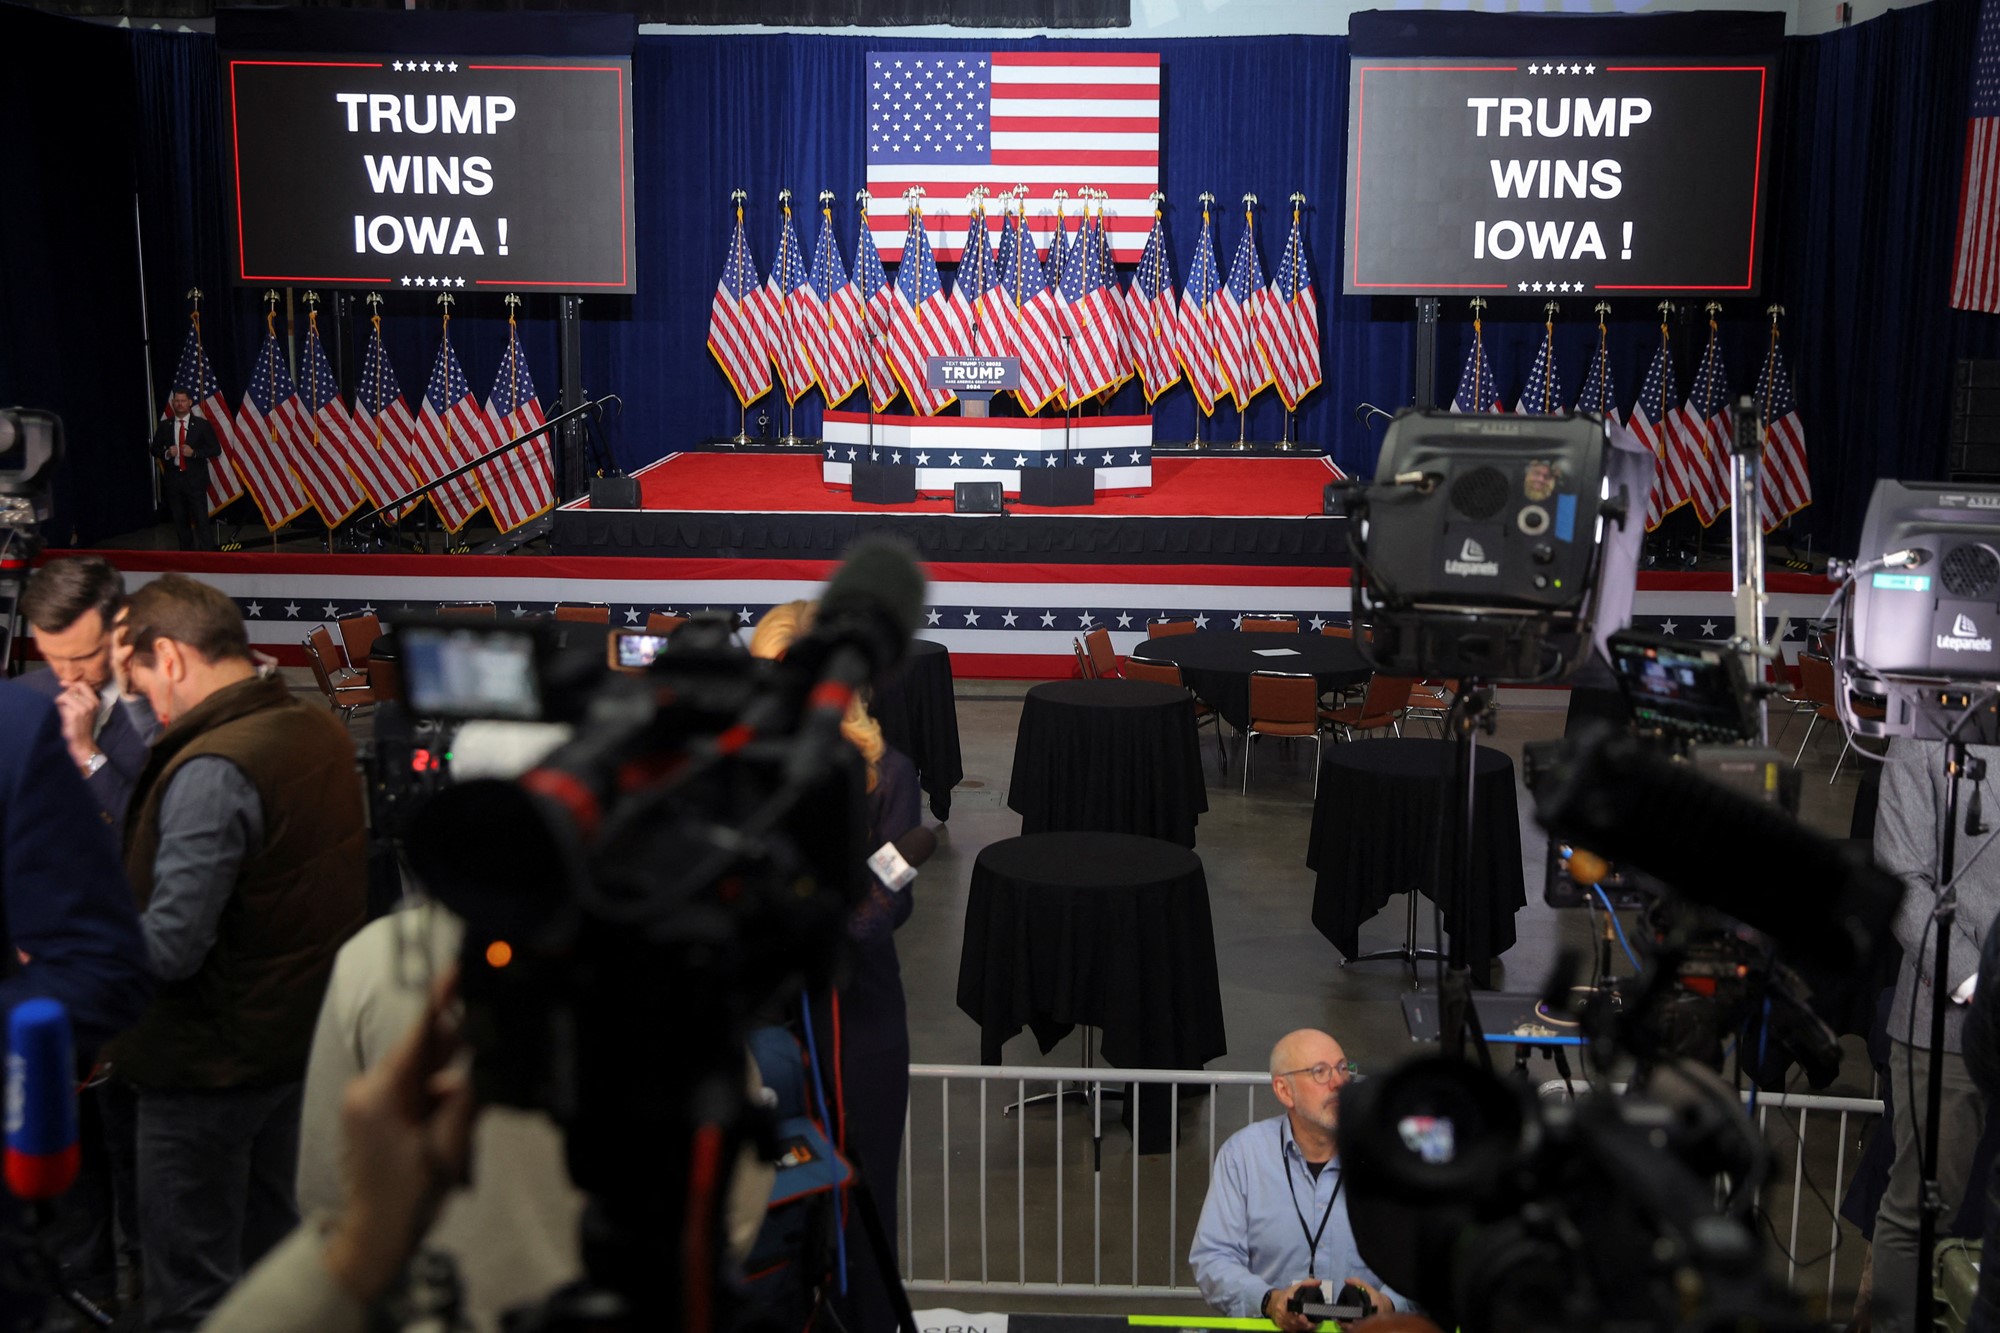 A stage set with several American flags and giant screens declaring TRUMP WINS IOWA!